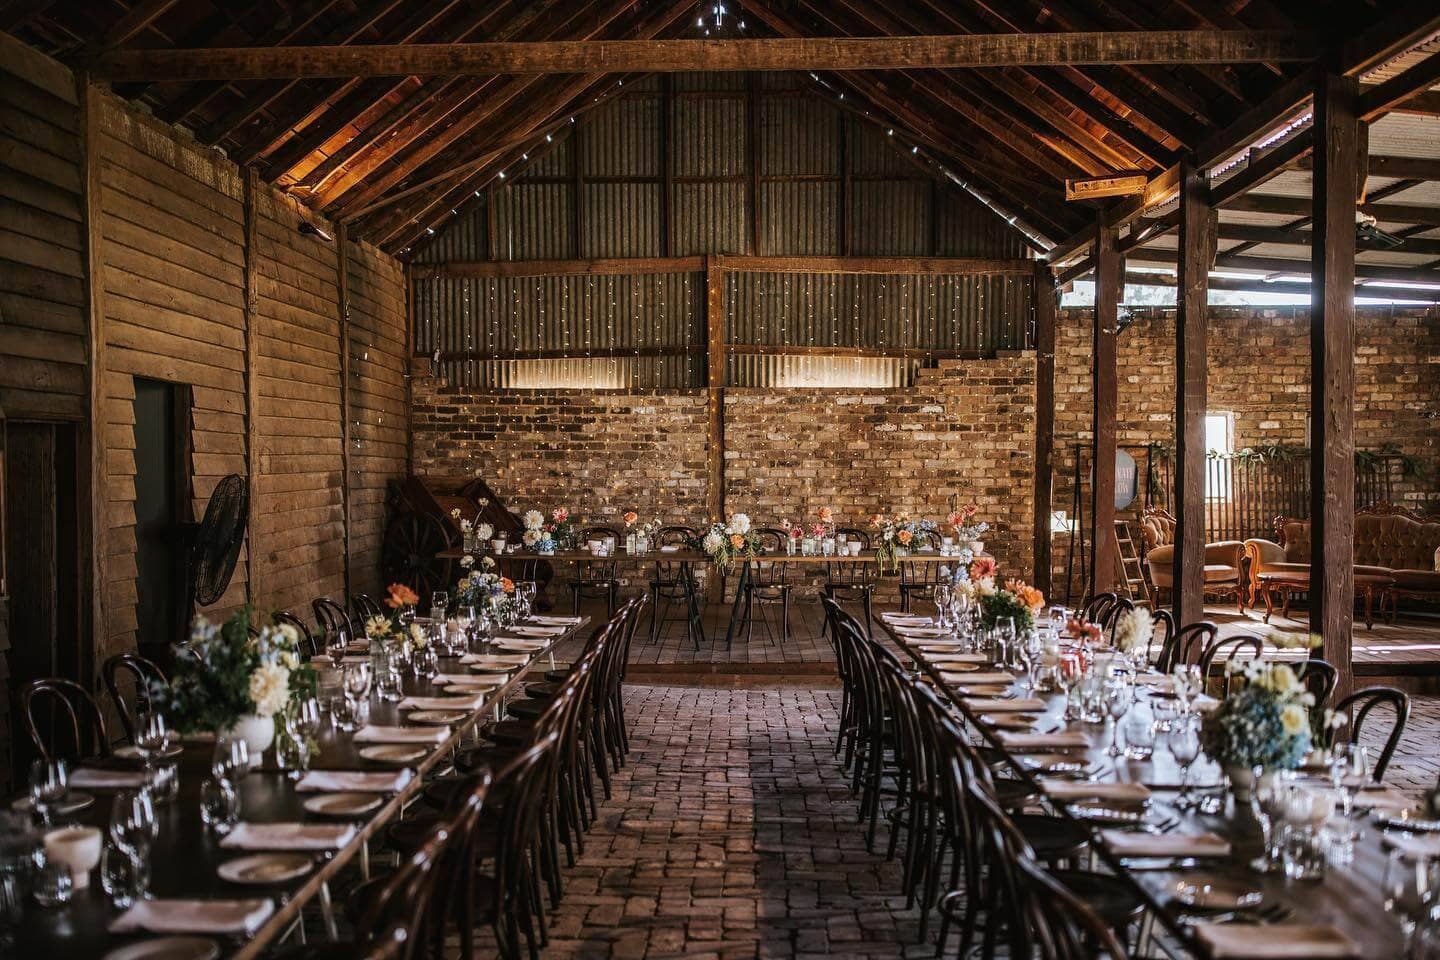 Best-rustic-country-wedding-venues-australia-Gledswood-Homestead-NSW-Neaton-Photography